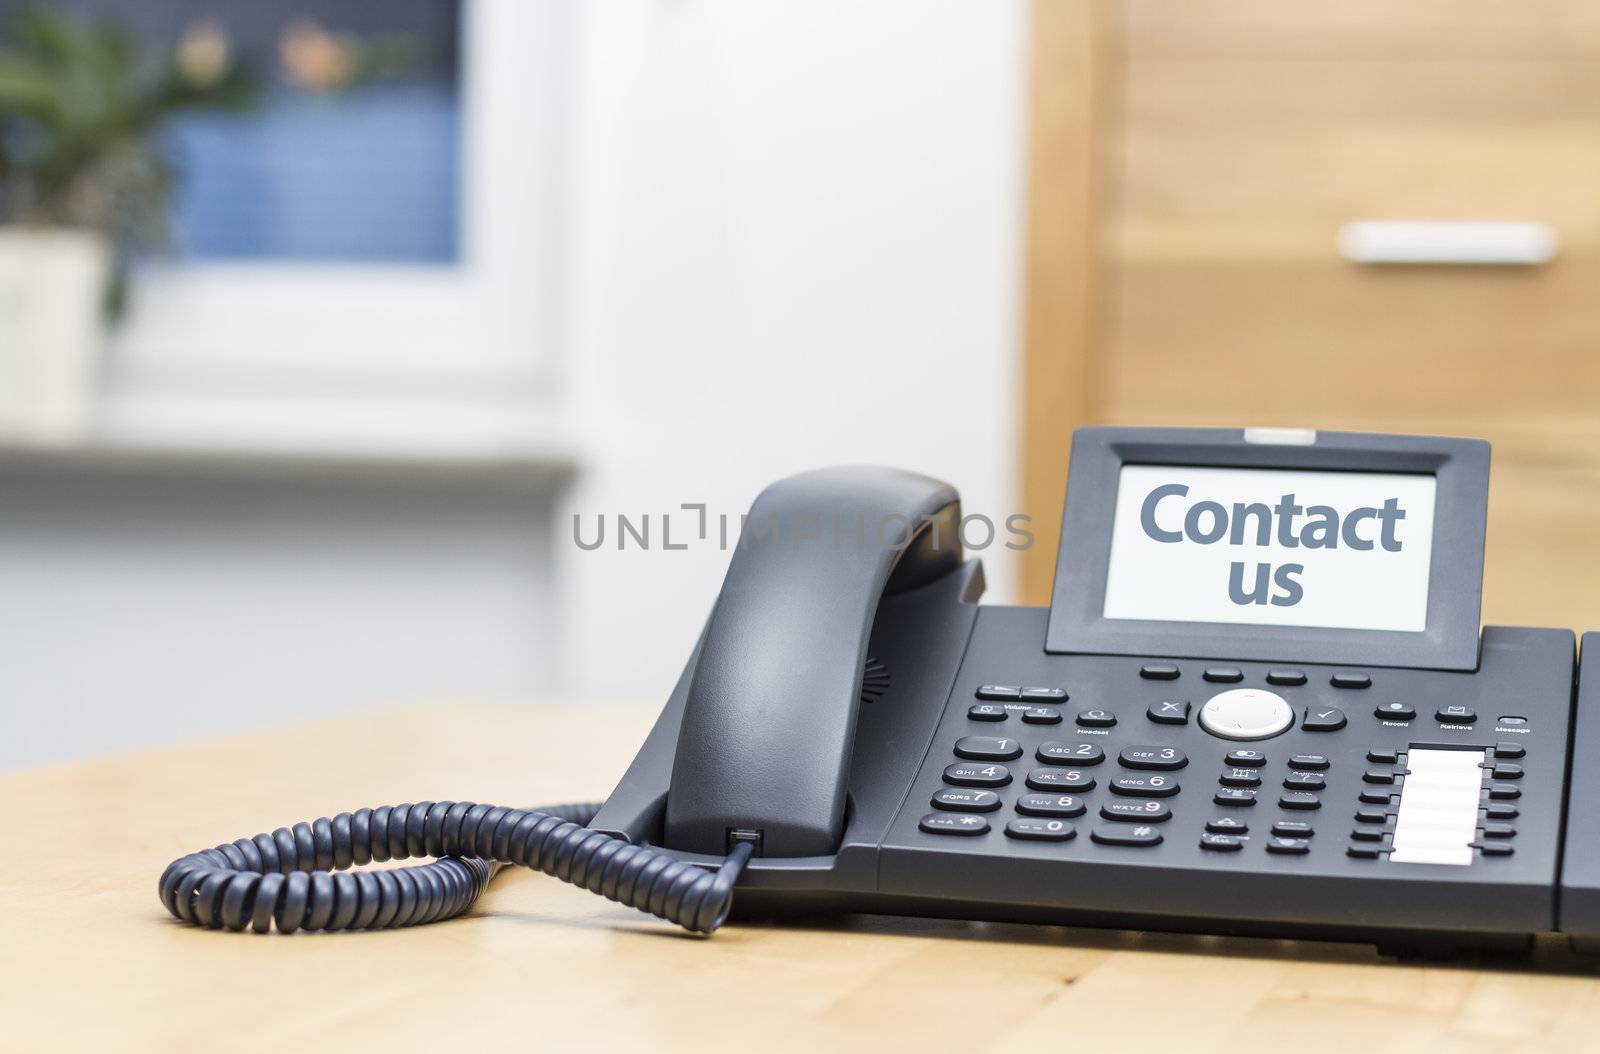 modern voip telephone on wooden desk saying CONTACT US